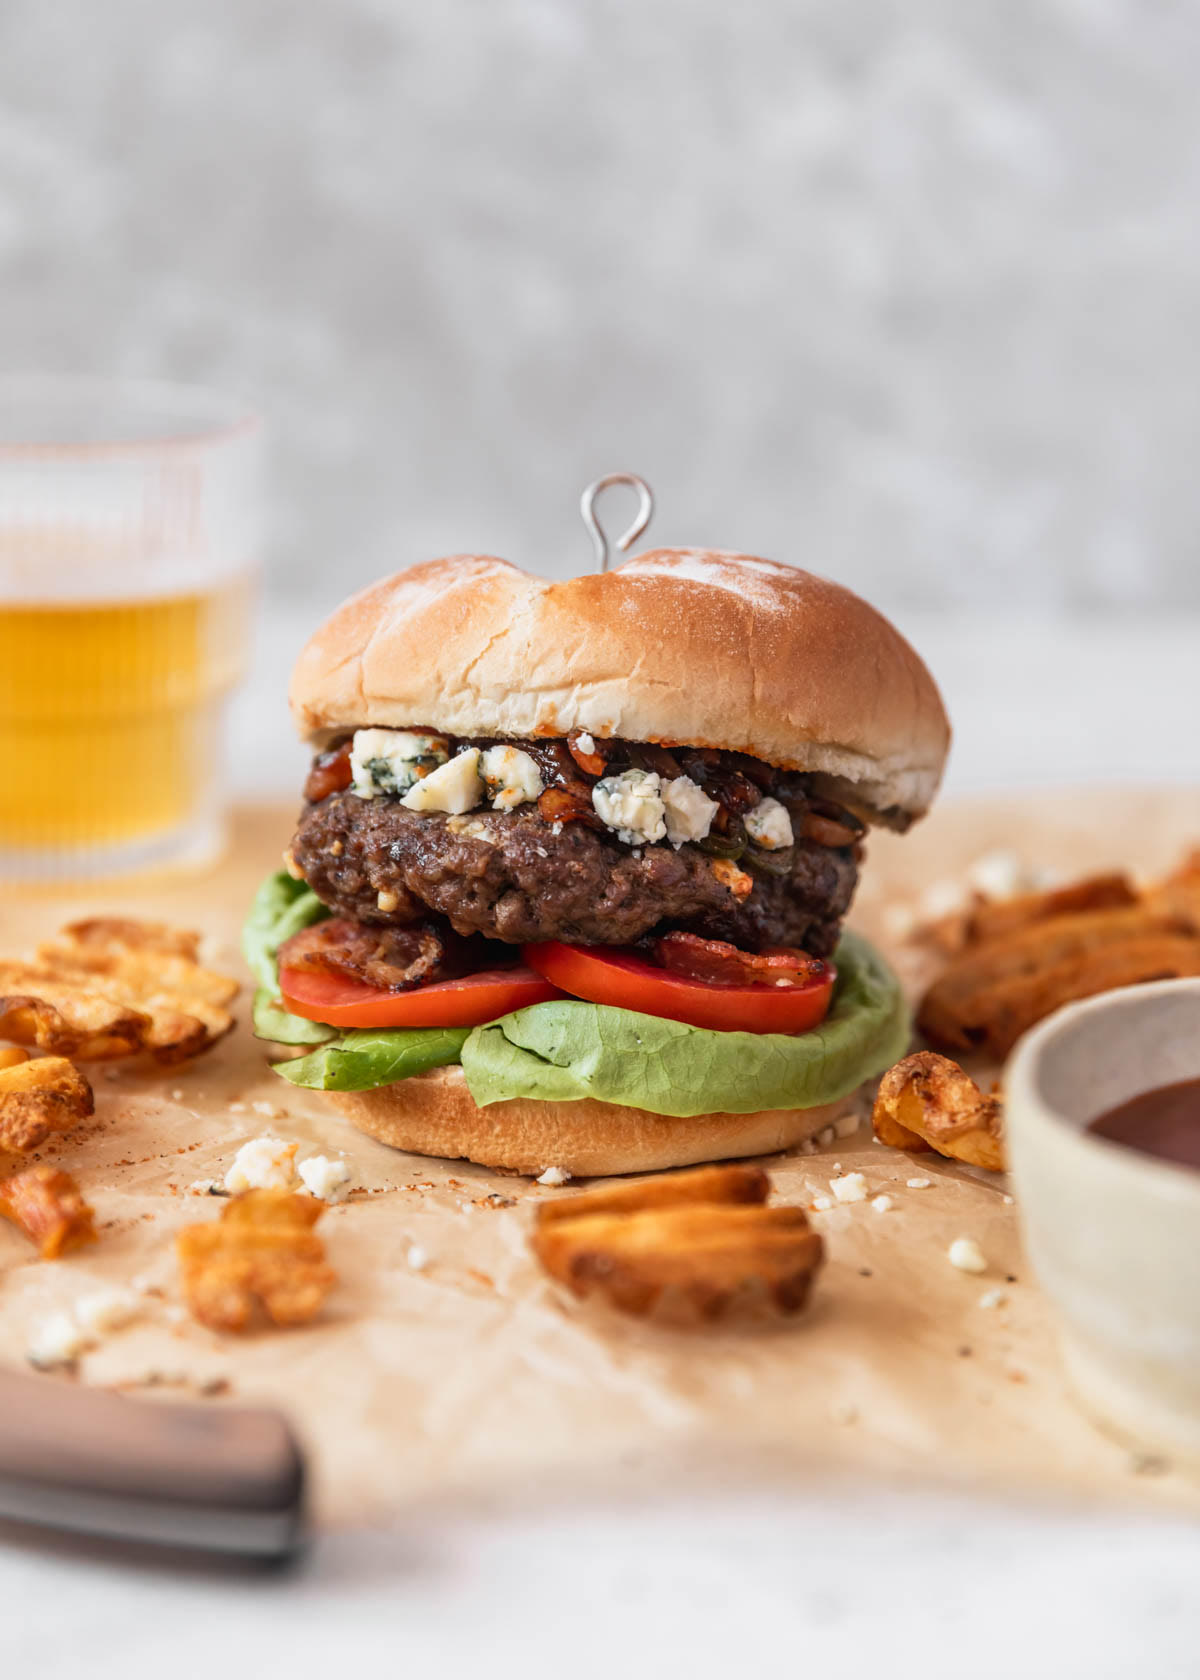 A blue cheese burger with bacon, tomato, and lettuce on tan parchment paper next to waffle fries and a glass of beer in front of a grey background.